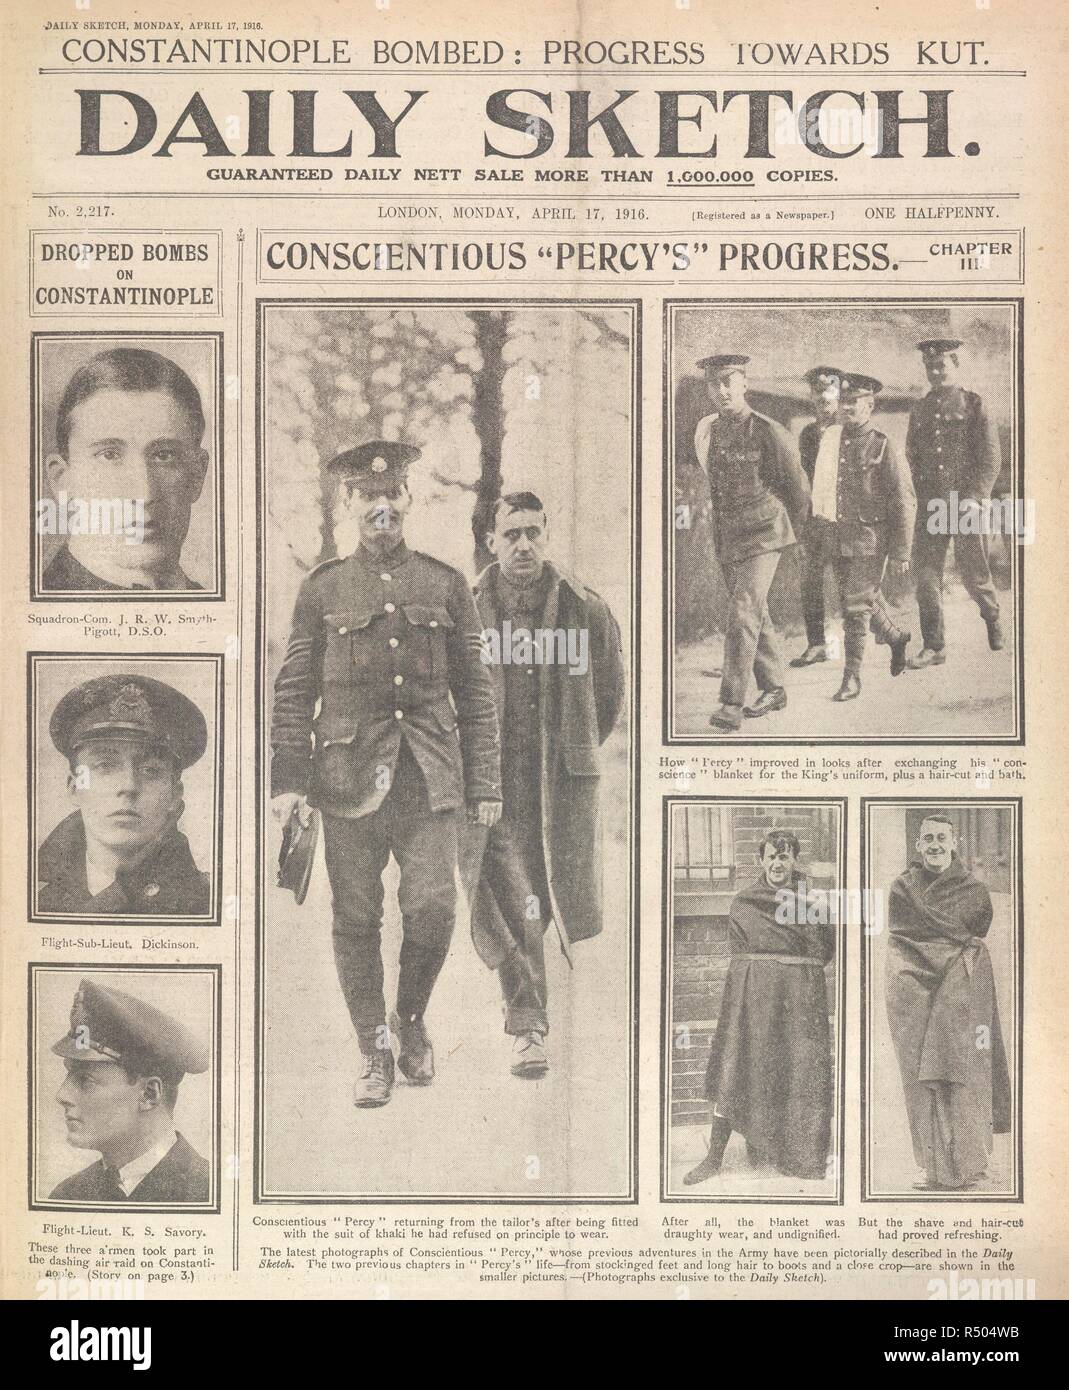 A main article 'Conscientious 'Percy's progress', and a three portraits of pilots who participated in a bombing raid on Constantinople, their names being: Smyth-Pigott, Dickinson, and Savory. Daily Sketch. London, 1916. Source: Daily Sketch, 17 April 1916, front page. Stock Photo